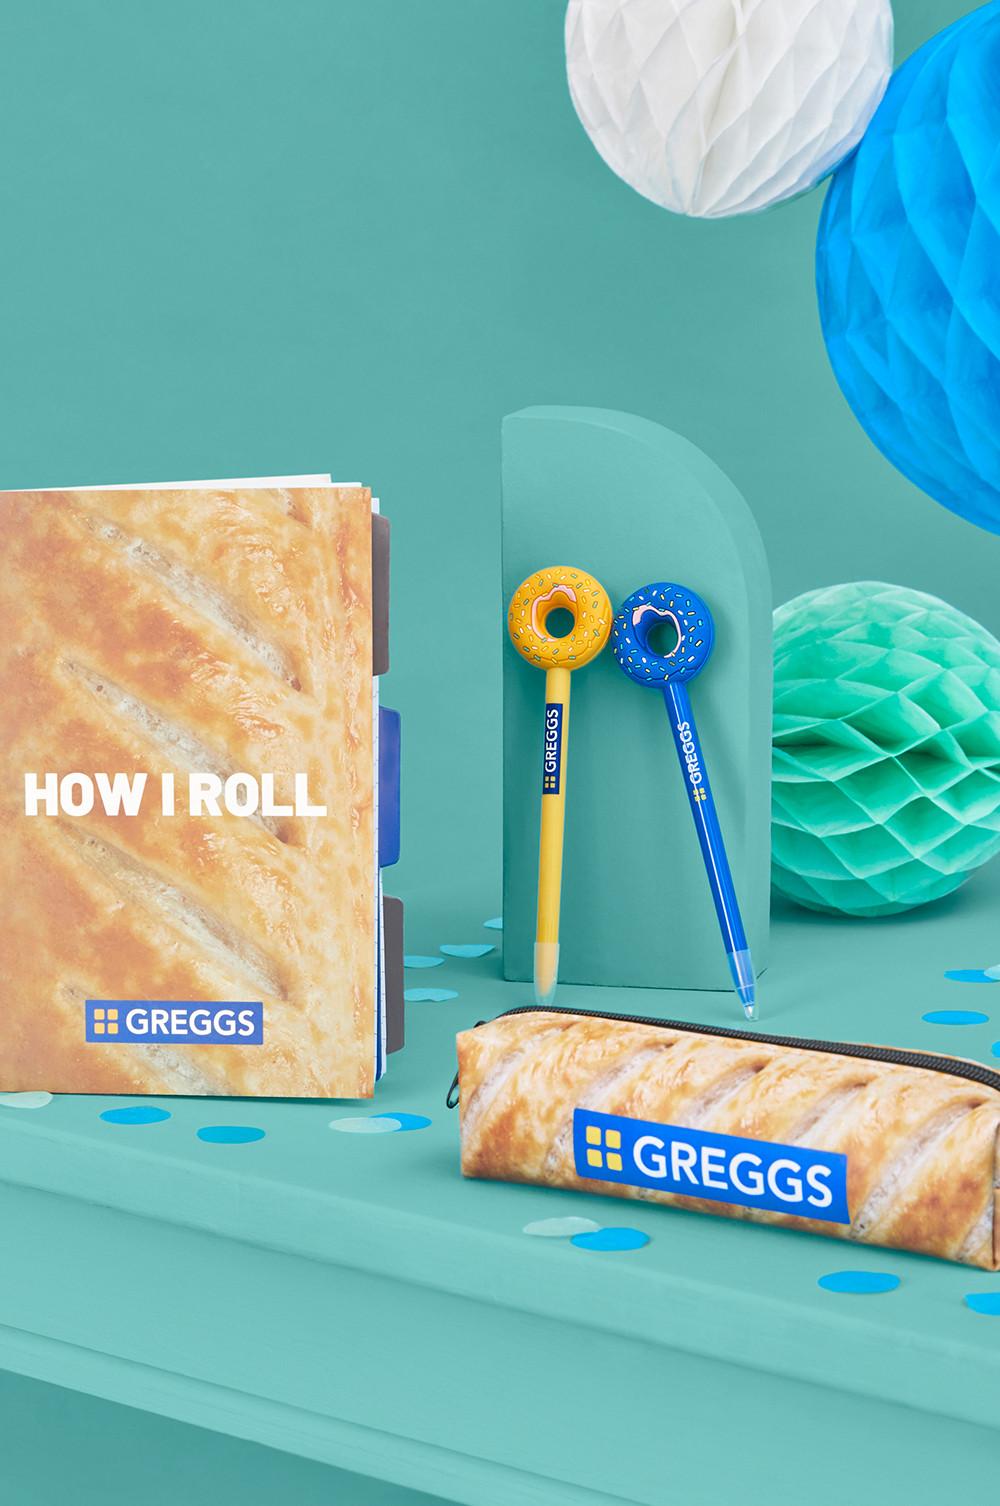 Greggs x Primark freshly baked fashion drop is here!